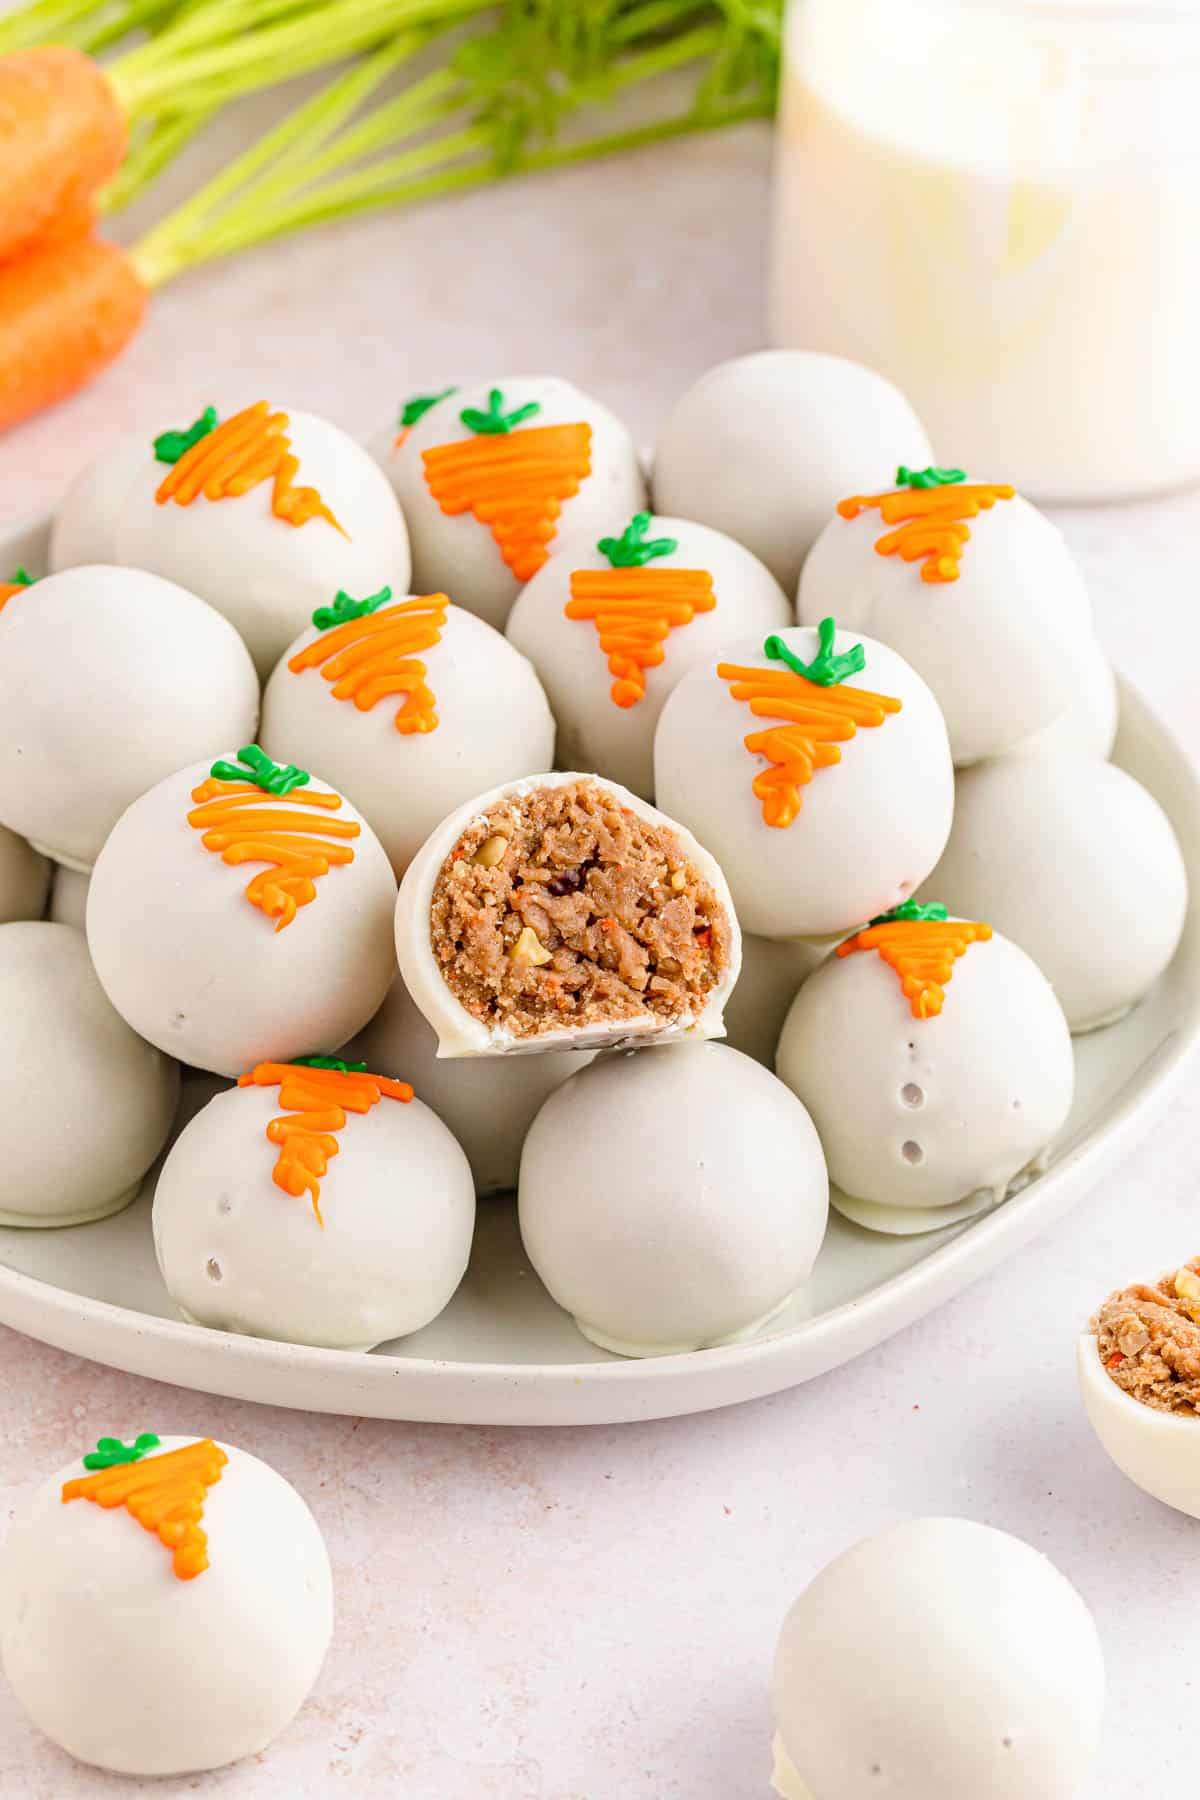 Carrot Cake balls stacked on a serving plate.